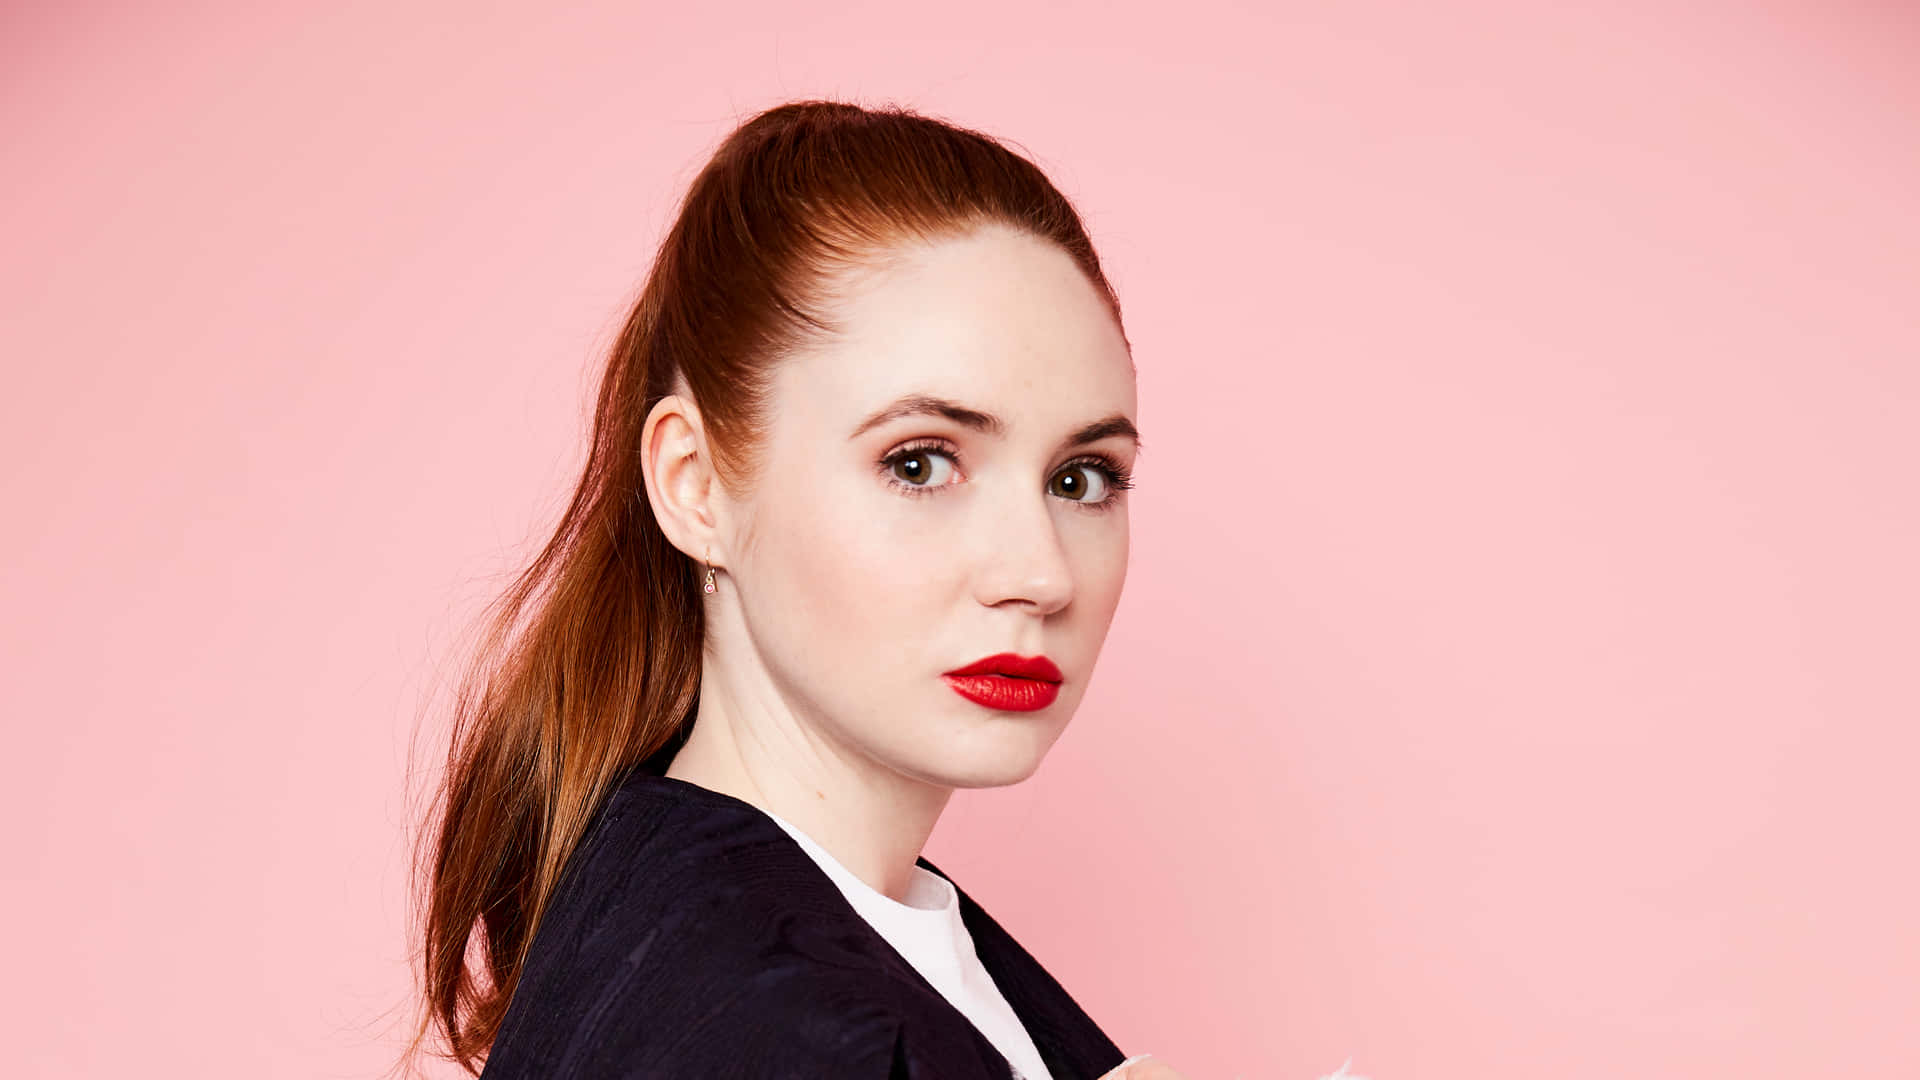 British Actress Karen Gillan Graces The Cover Of Marie Claire February 2021.